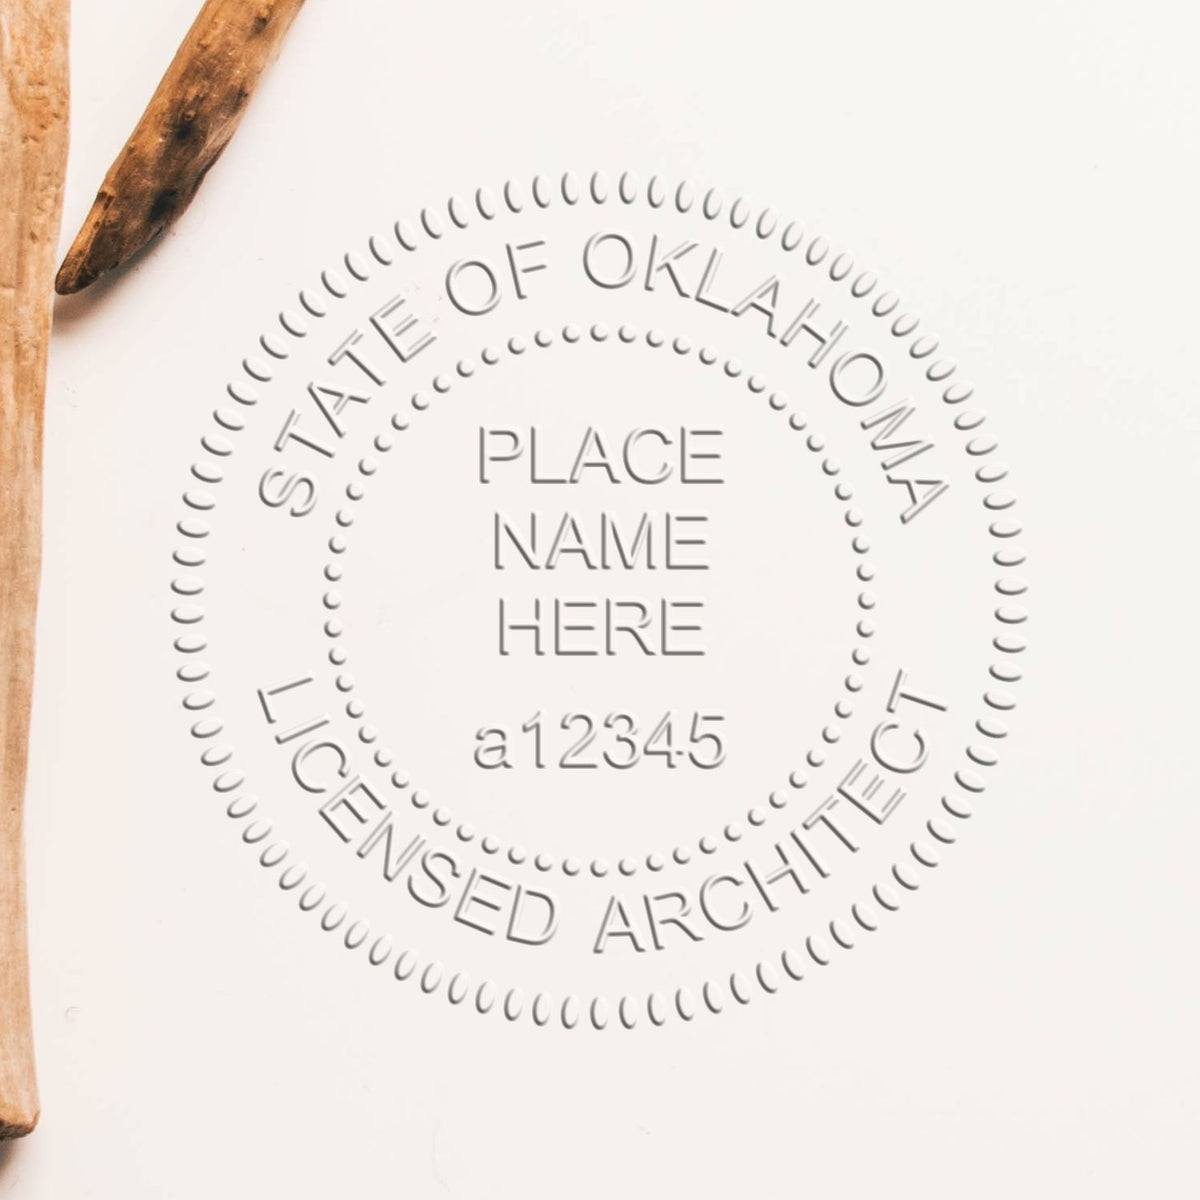 An alternative view of the State of Oklahoma Long Reach Architectural Embossing Seal stamped on a sheet of paper showing the image in use